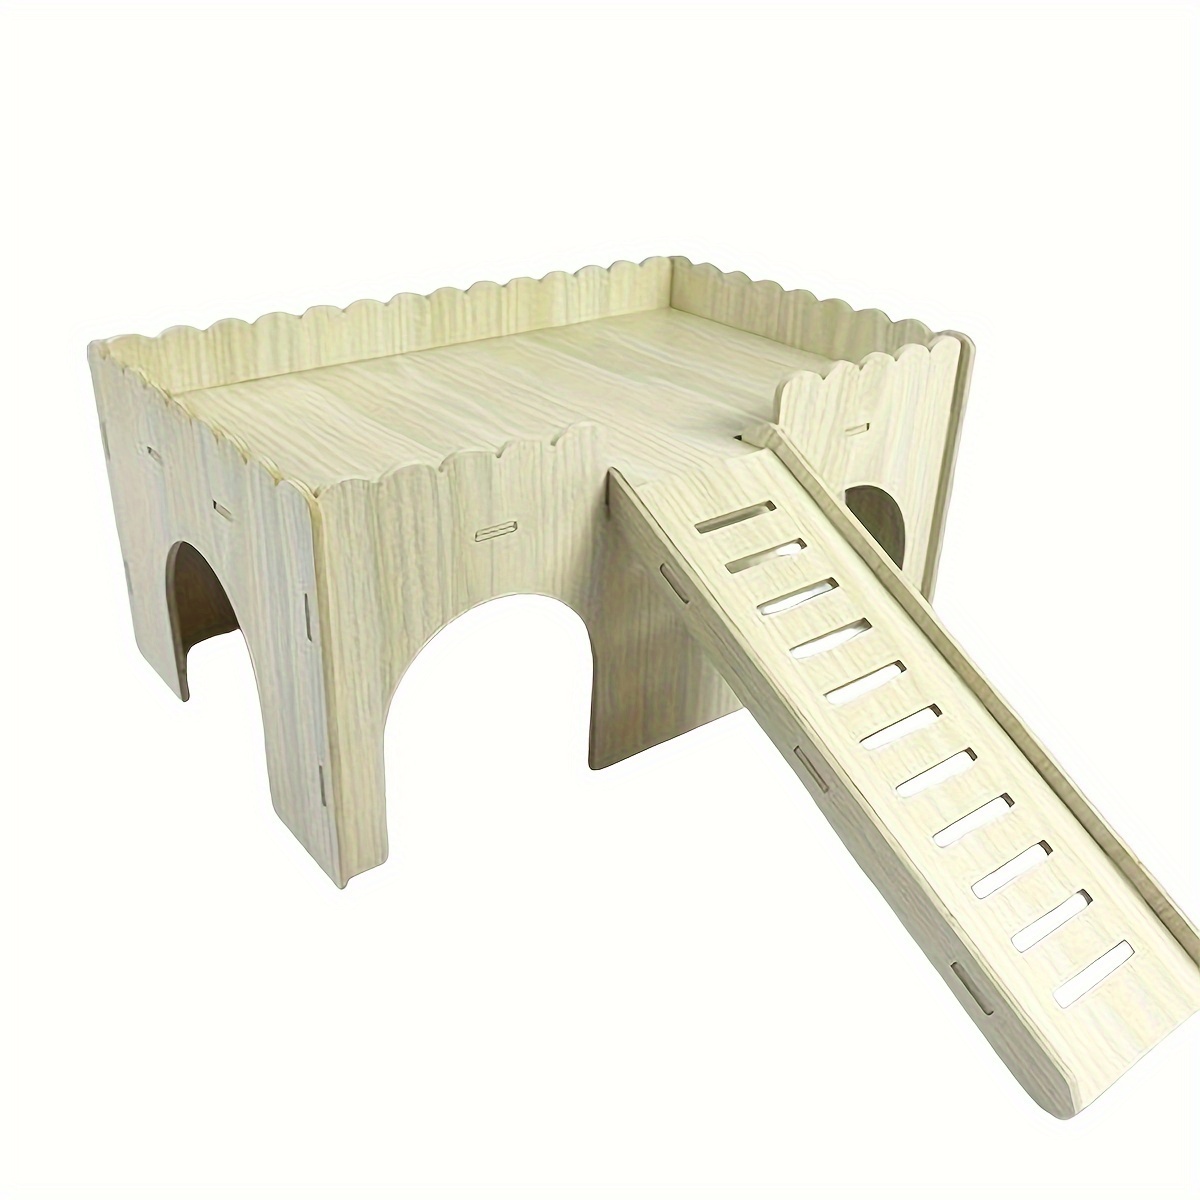 

Wooden Hamster House, With Ladder, Playground, Hamster Warehouse, Low Wooden Squirrel Hamster Small House